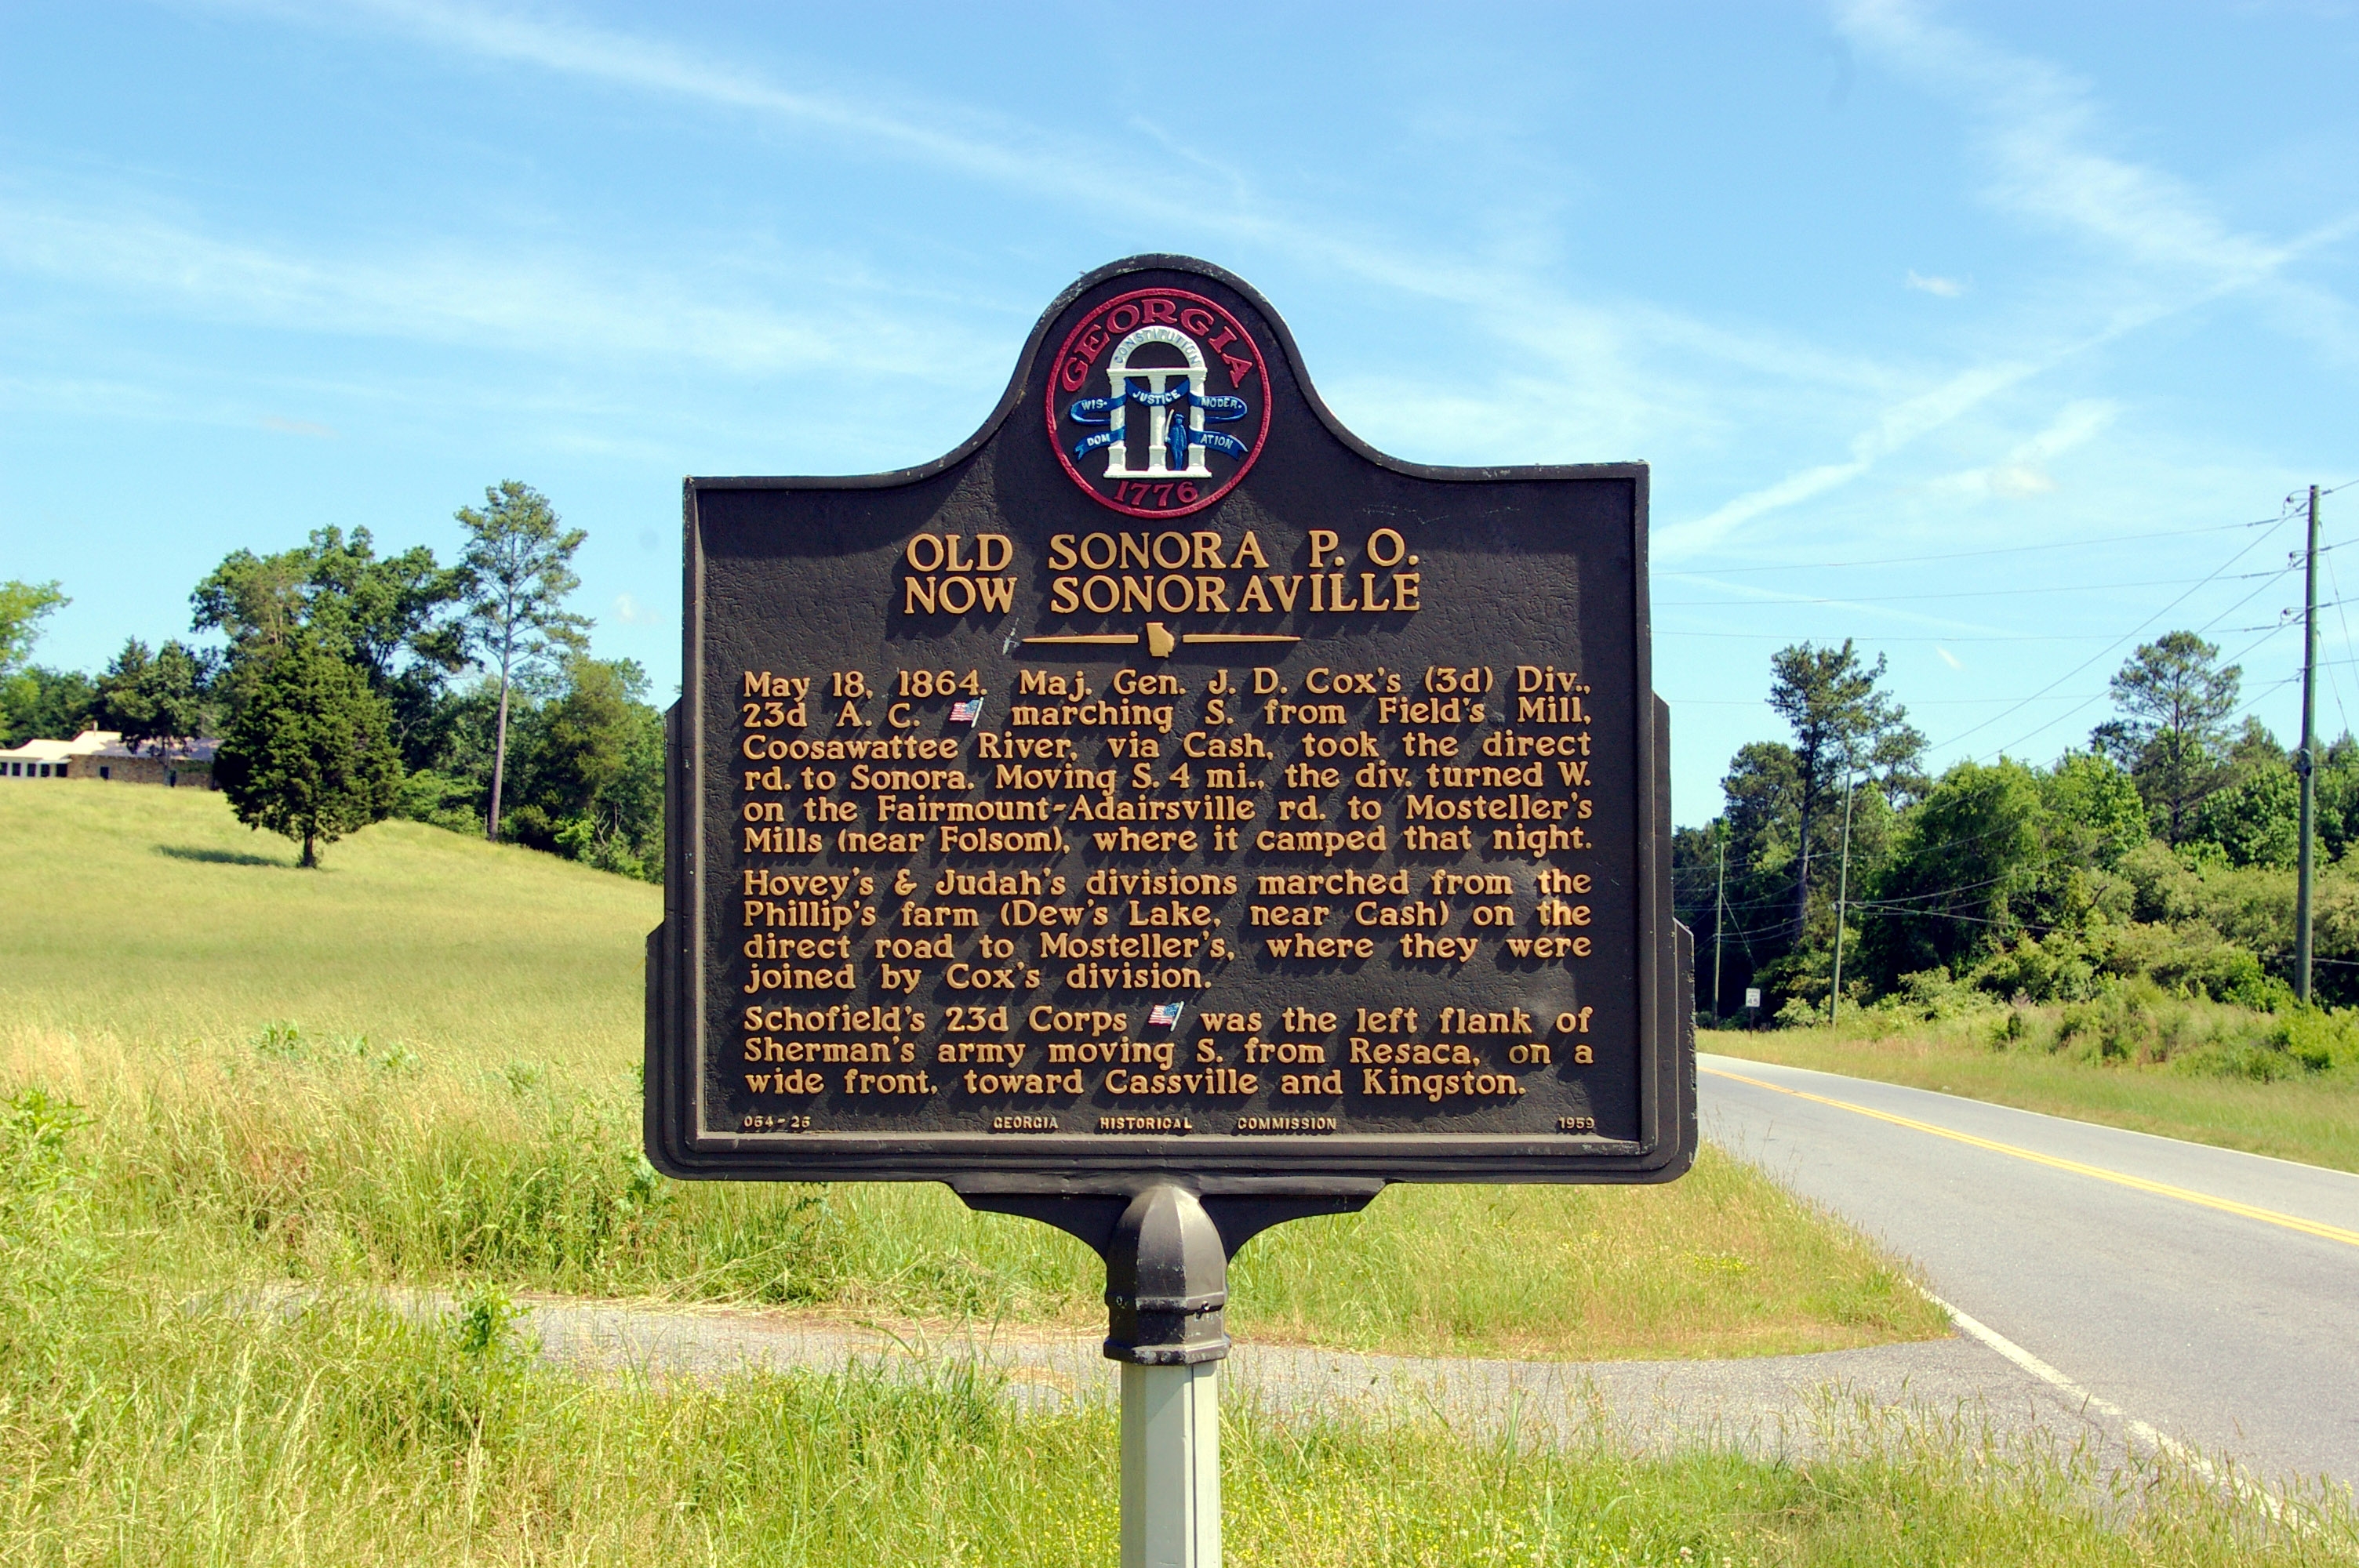 Old Sonora P.O. Now Sonoraville Marker as renovated.